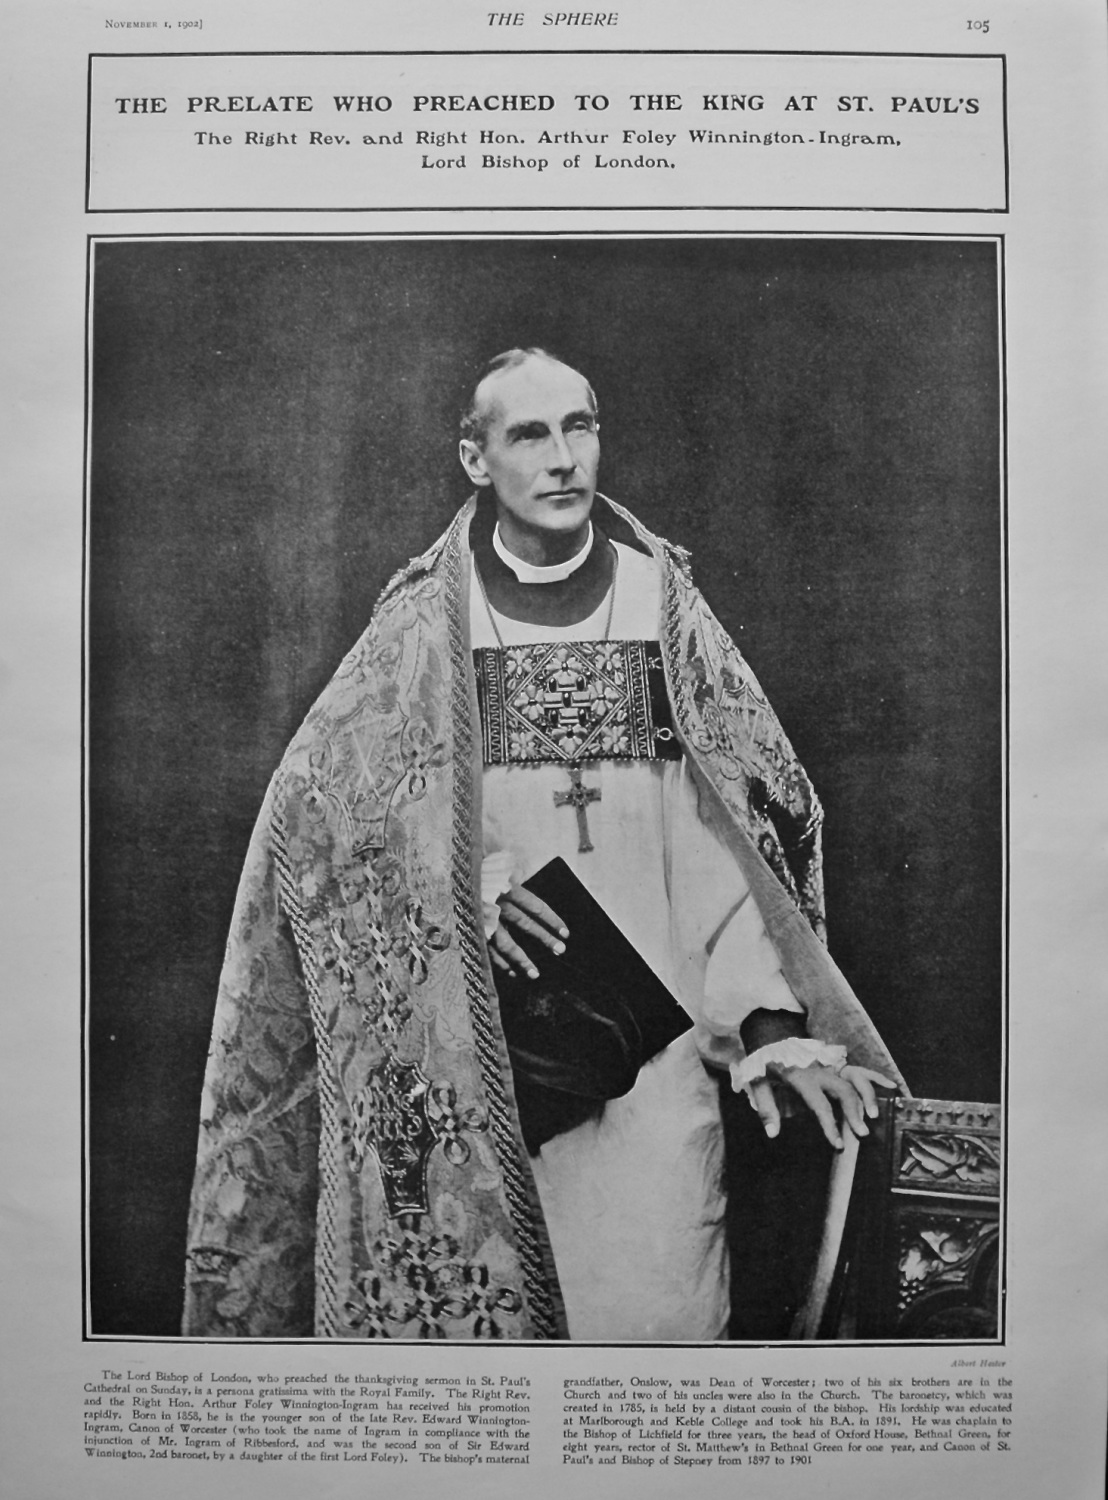 The Prelate who Preached to the King at St. Paul's, the Right Rev. and Righ